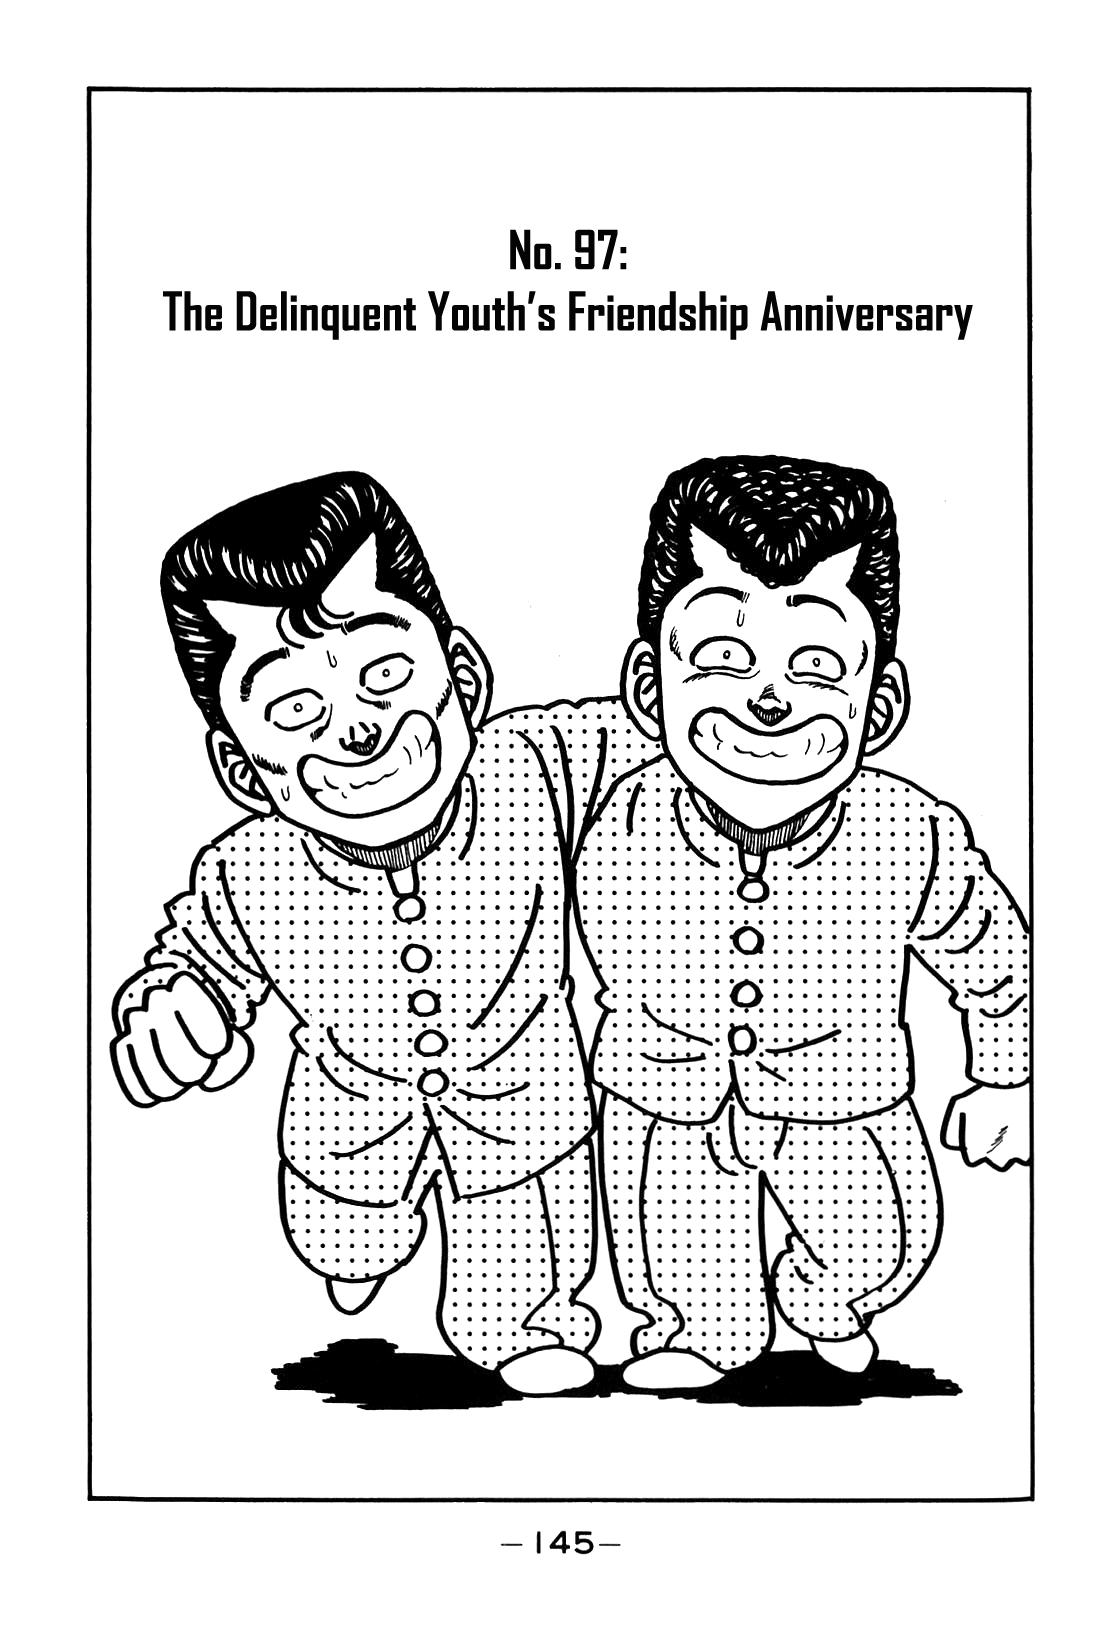 Be Bop High School Vol. 11 Ch. 97 The Delinquent Youth's Friendship Anniversary